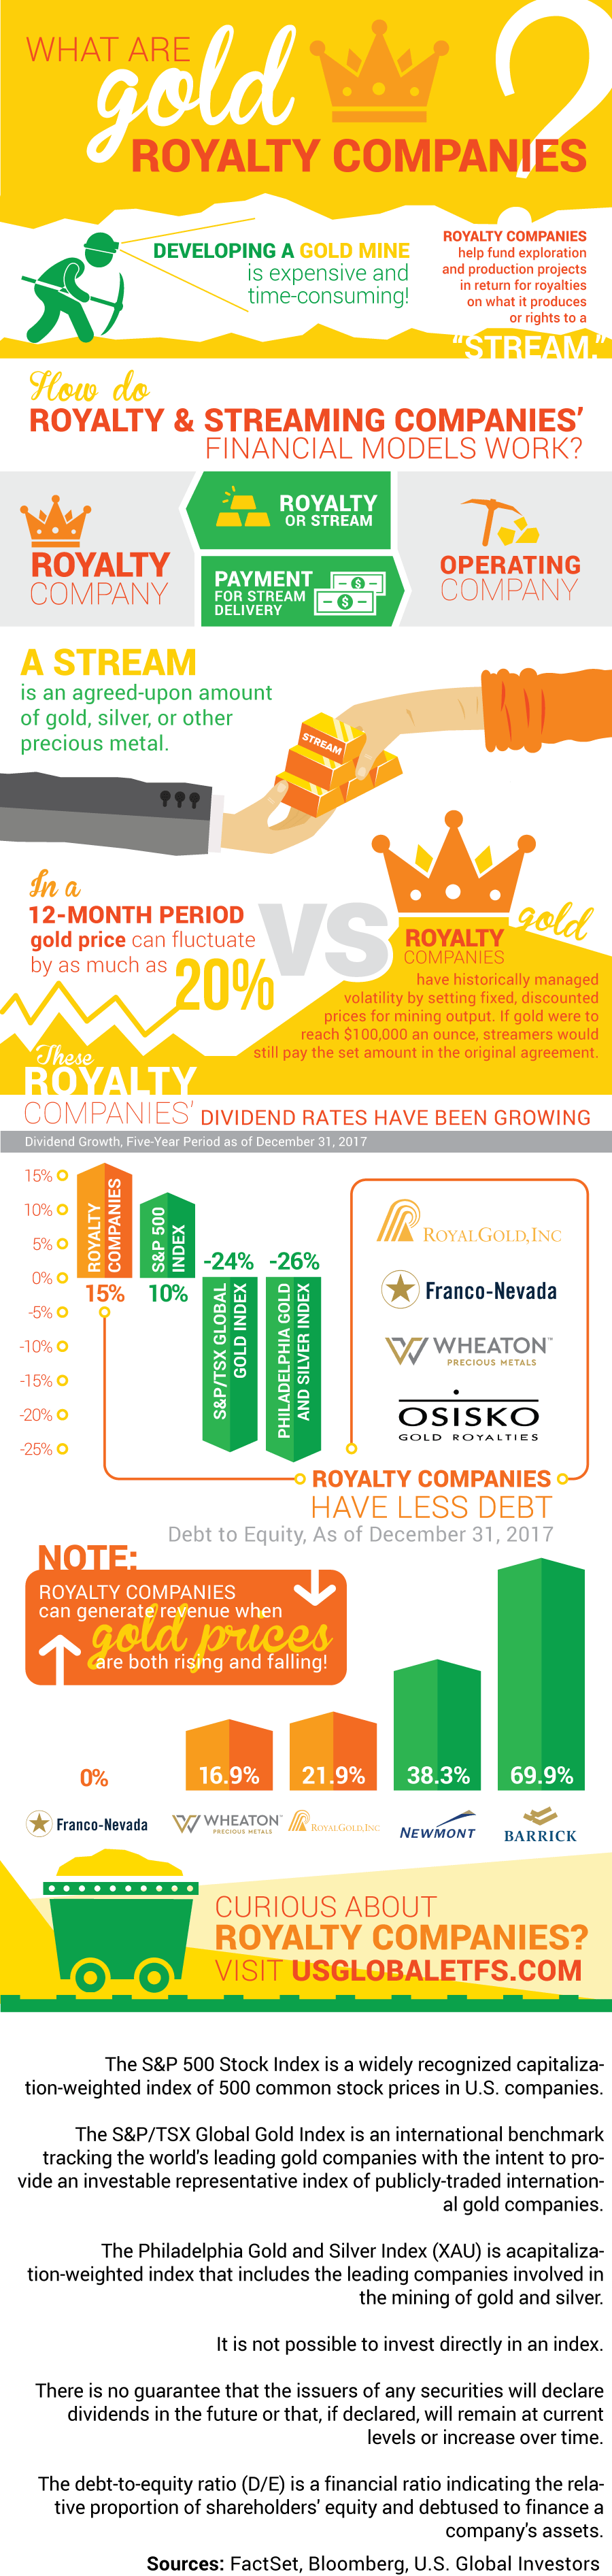 gold royalty companies infographic GOAU go gold